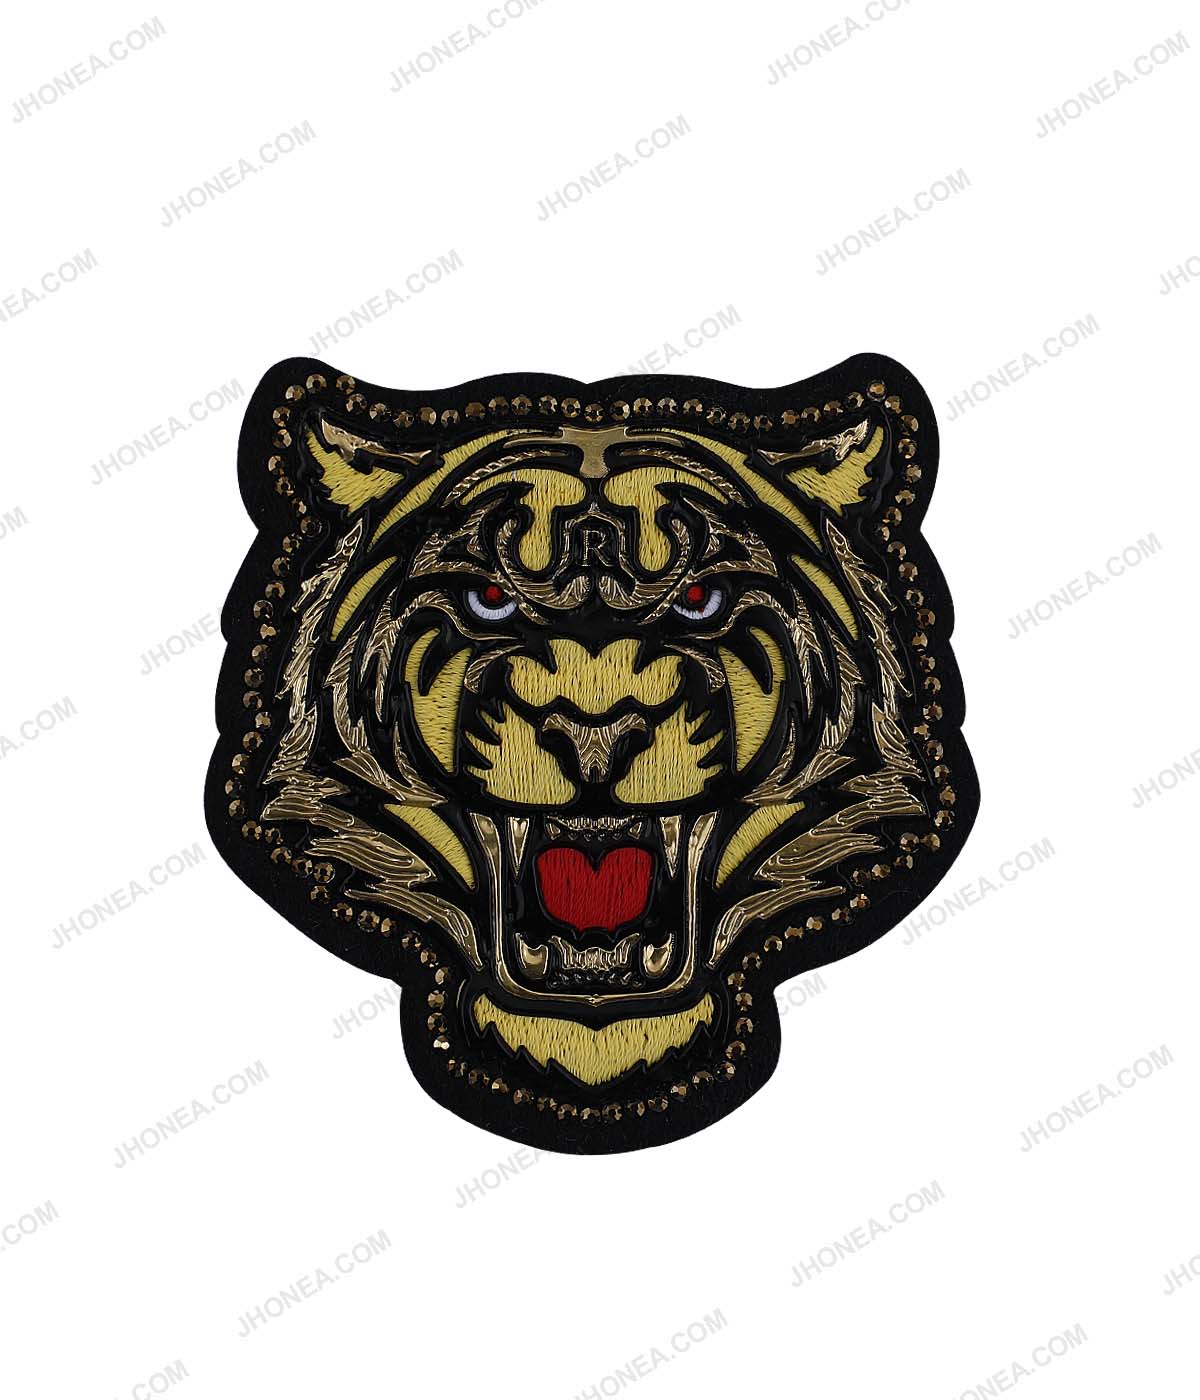 Premium Design Diamond Studded Tiger Face Patch for Shirts